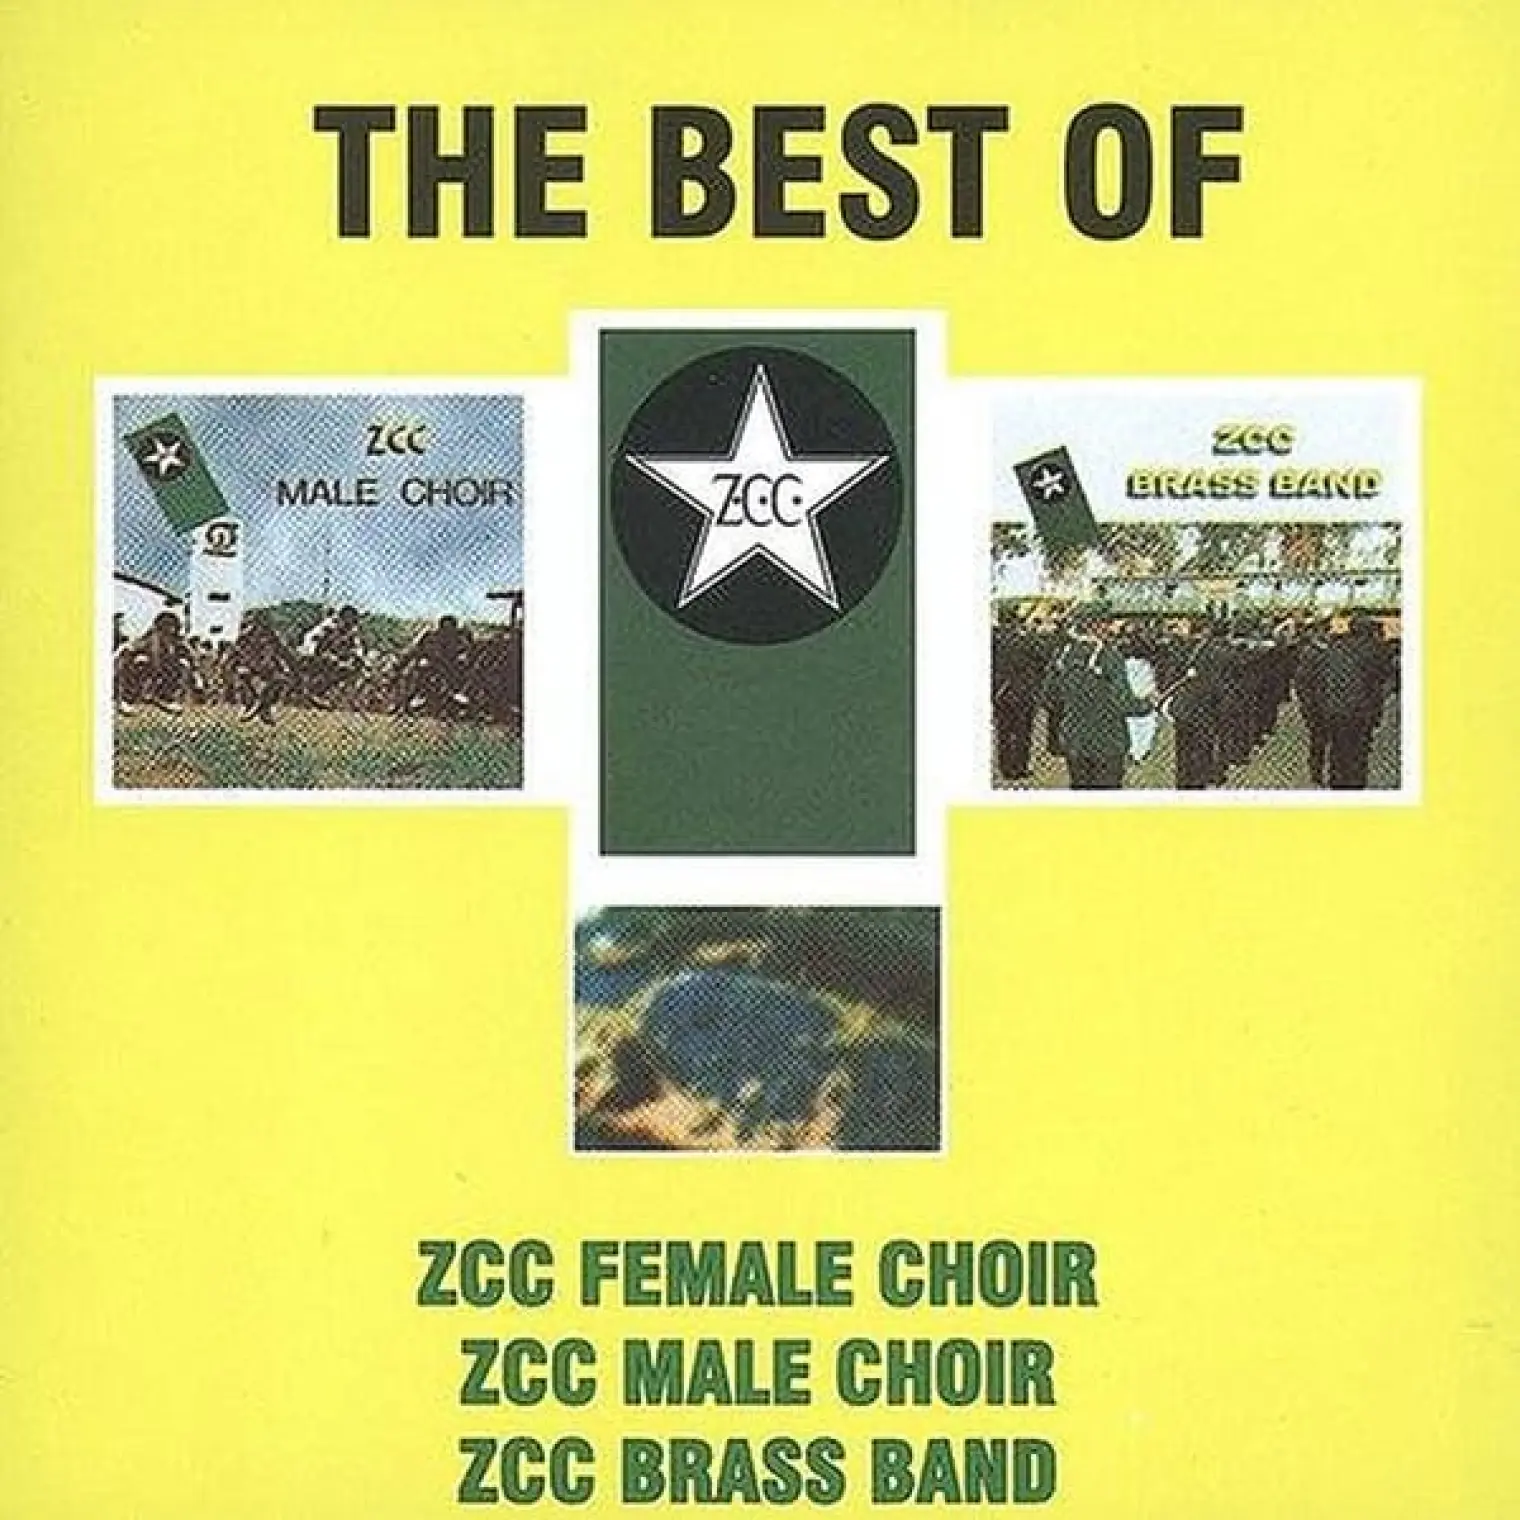 The Best Of Z.C.C. -  Z.C.C. Brass Band 